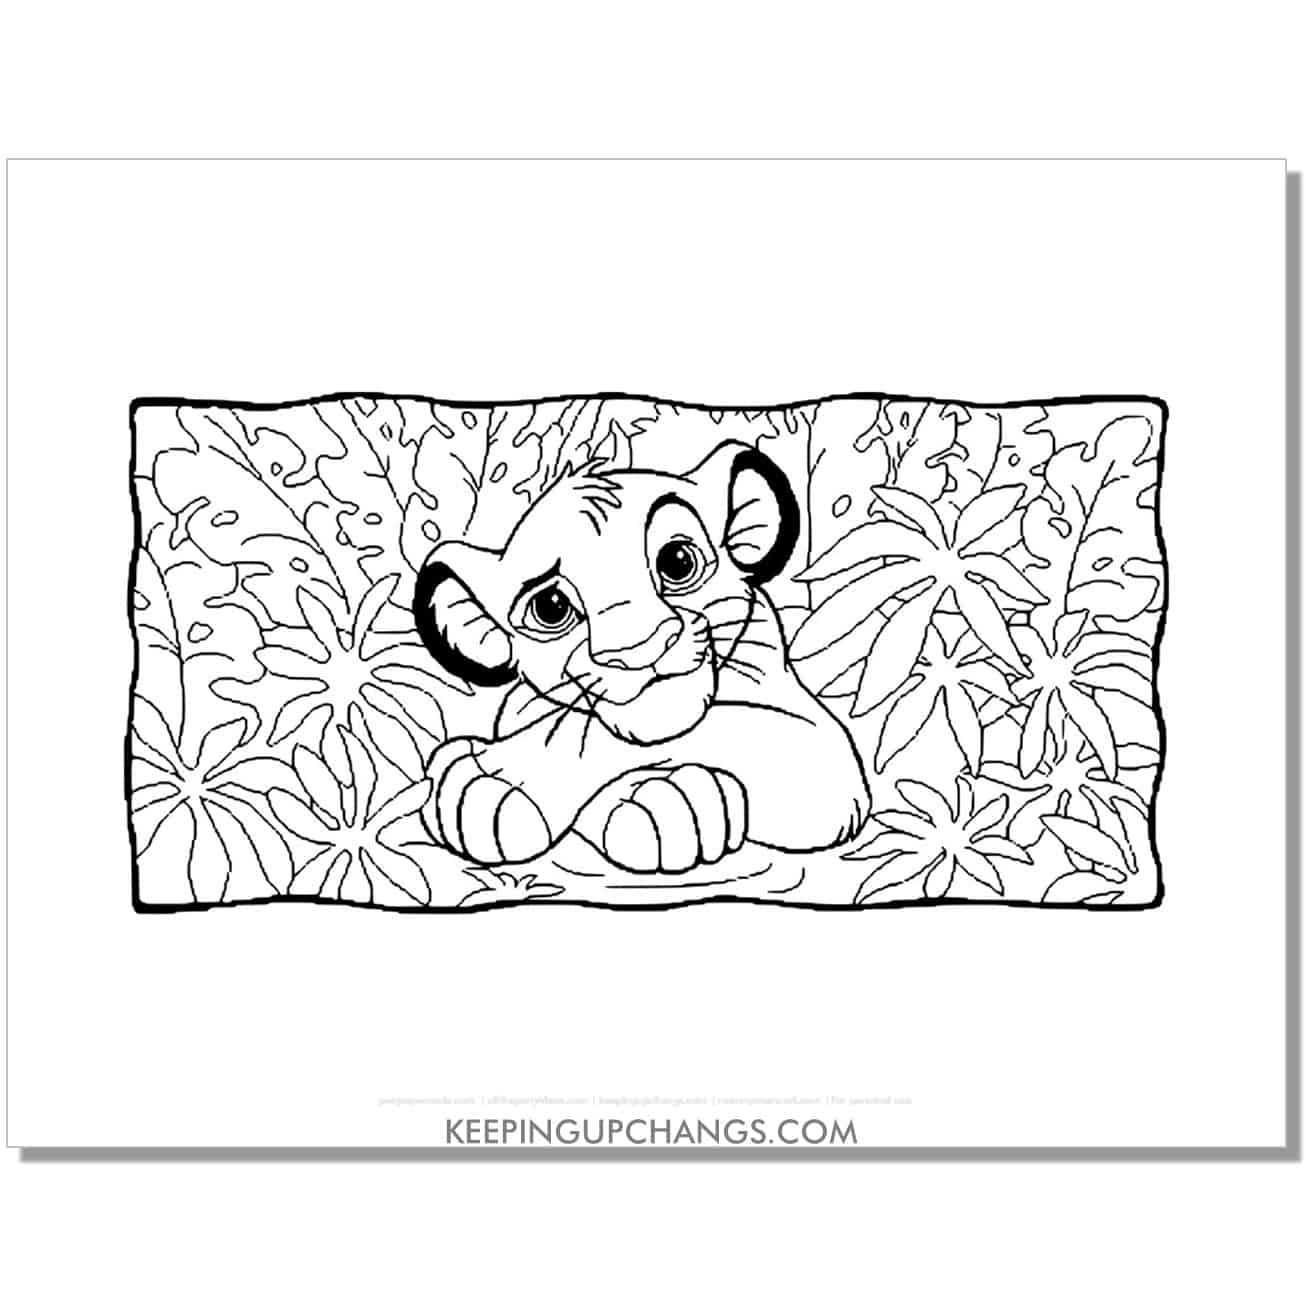 simba in the jungle lion king coloring page, sheet.